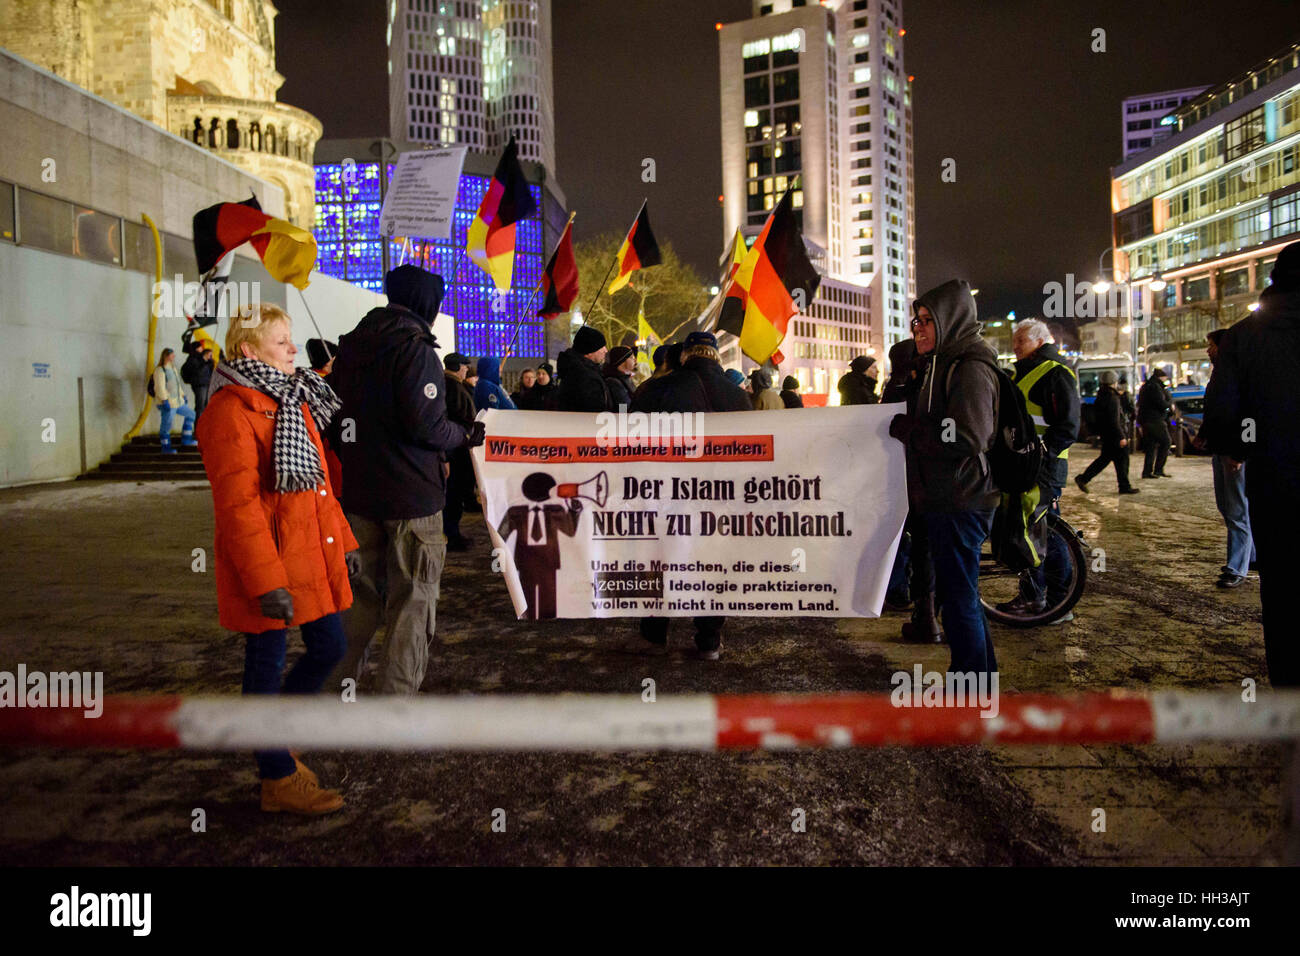 Berlin, Germany. 16th Jan, 2017. Supporters of the Baergida (Berlin Patriots Against the Islamization of the Occident) group hold flags and banners during a demonstration at Breitscheidplatz in Berlin, Germany, 16 January 2017. Photo: Gregor Fischer/dpa/Alamy Live News Stock Photo